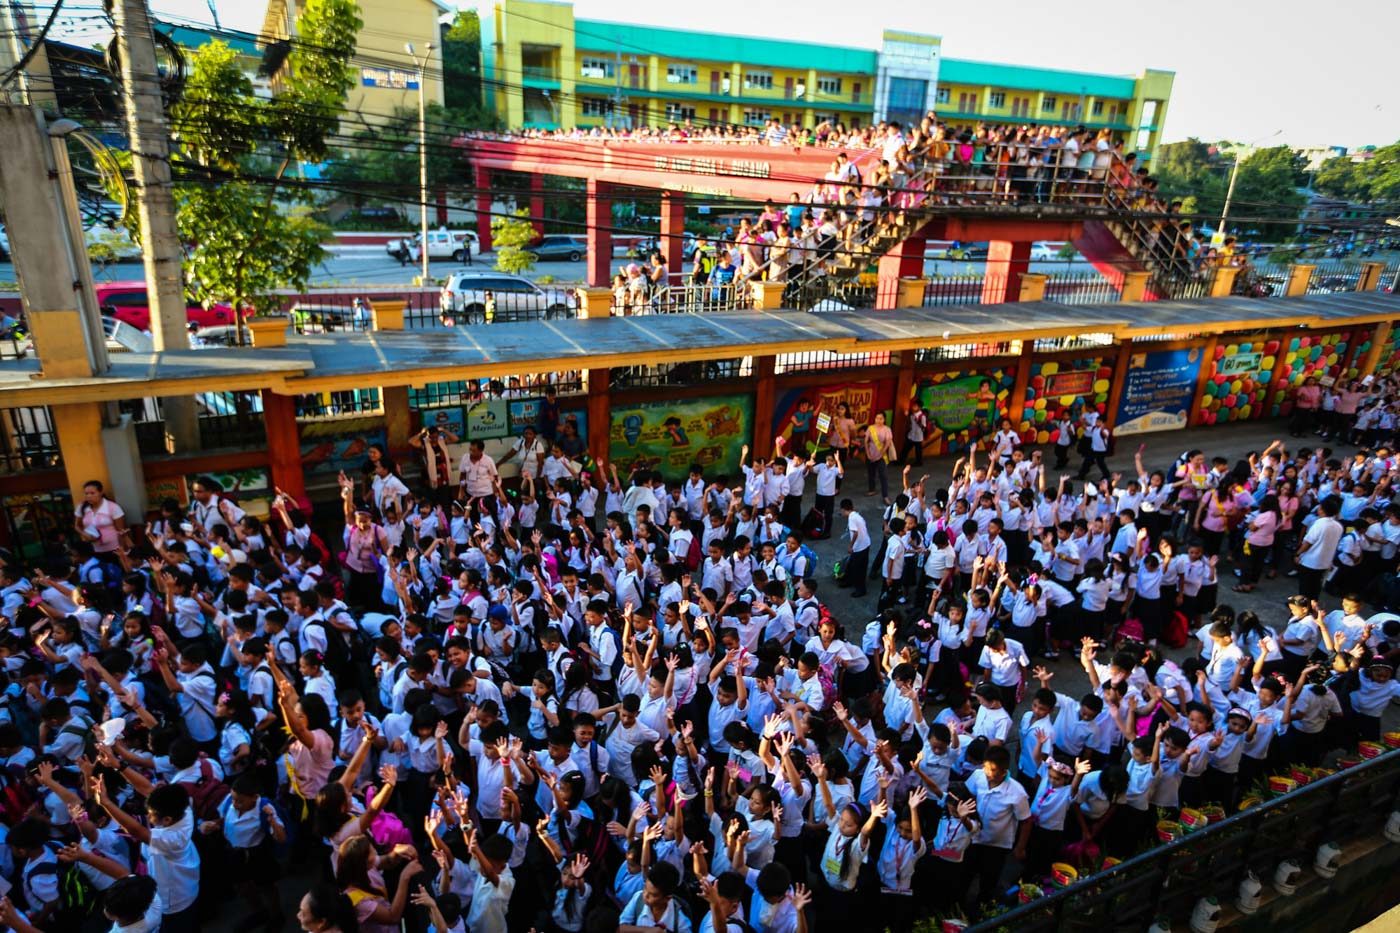 27.2 million students troop to schools nationwide